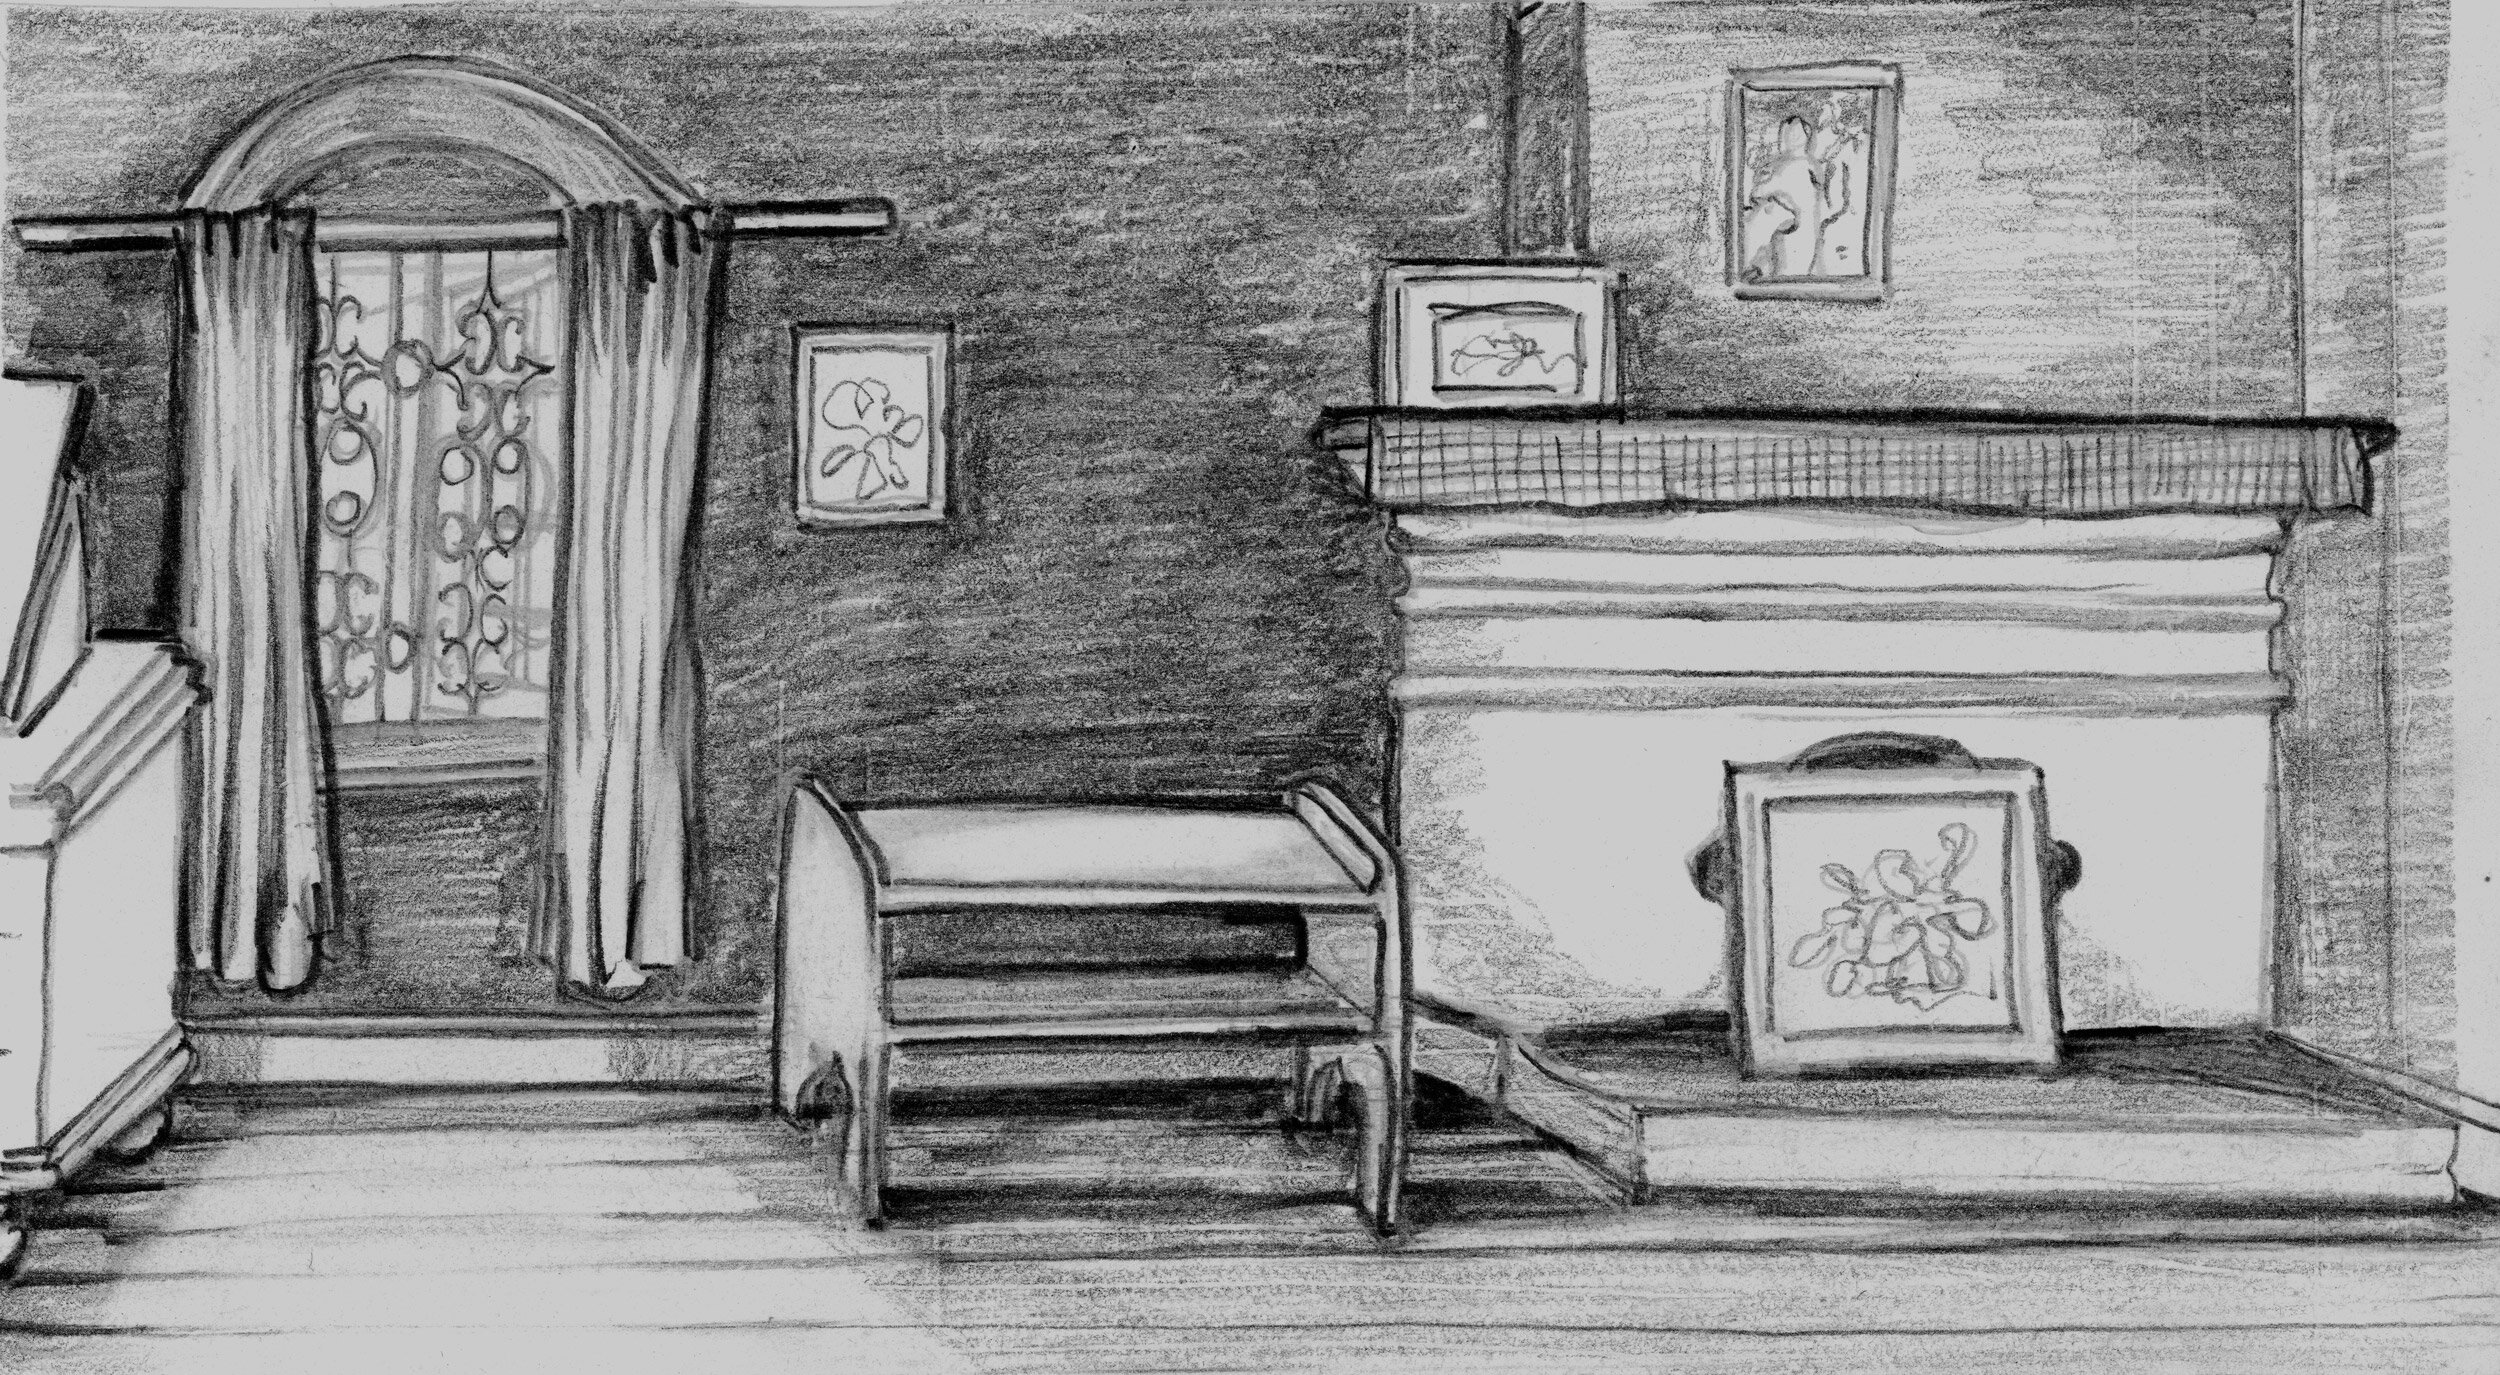   Kalimpong India, Fireplace in Aunty Jean’s Old Room DGH  2010 Pencil on paper  4x7.5 inches 